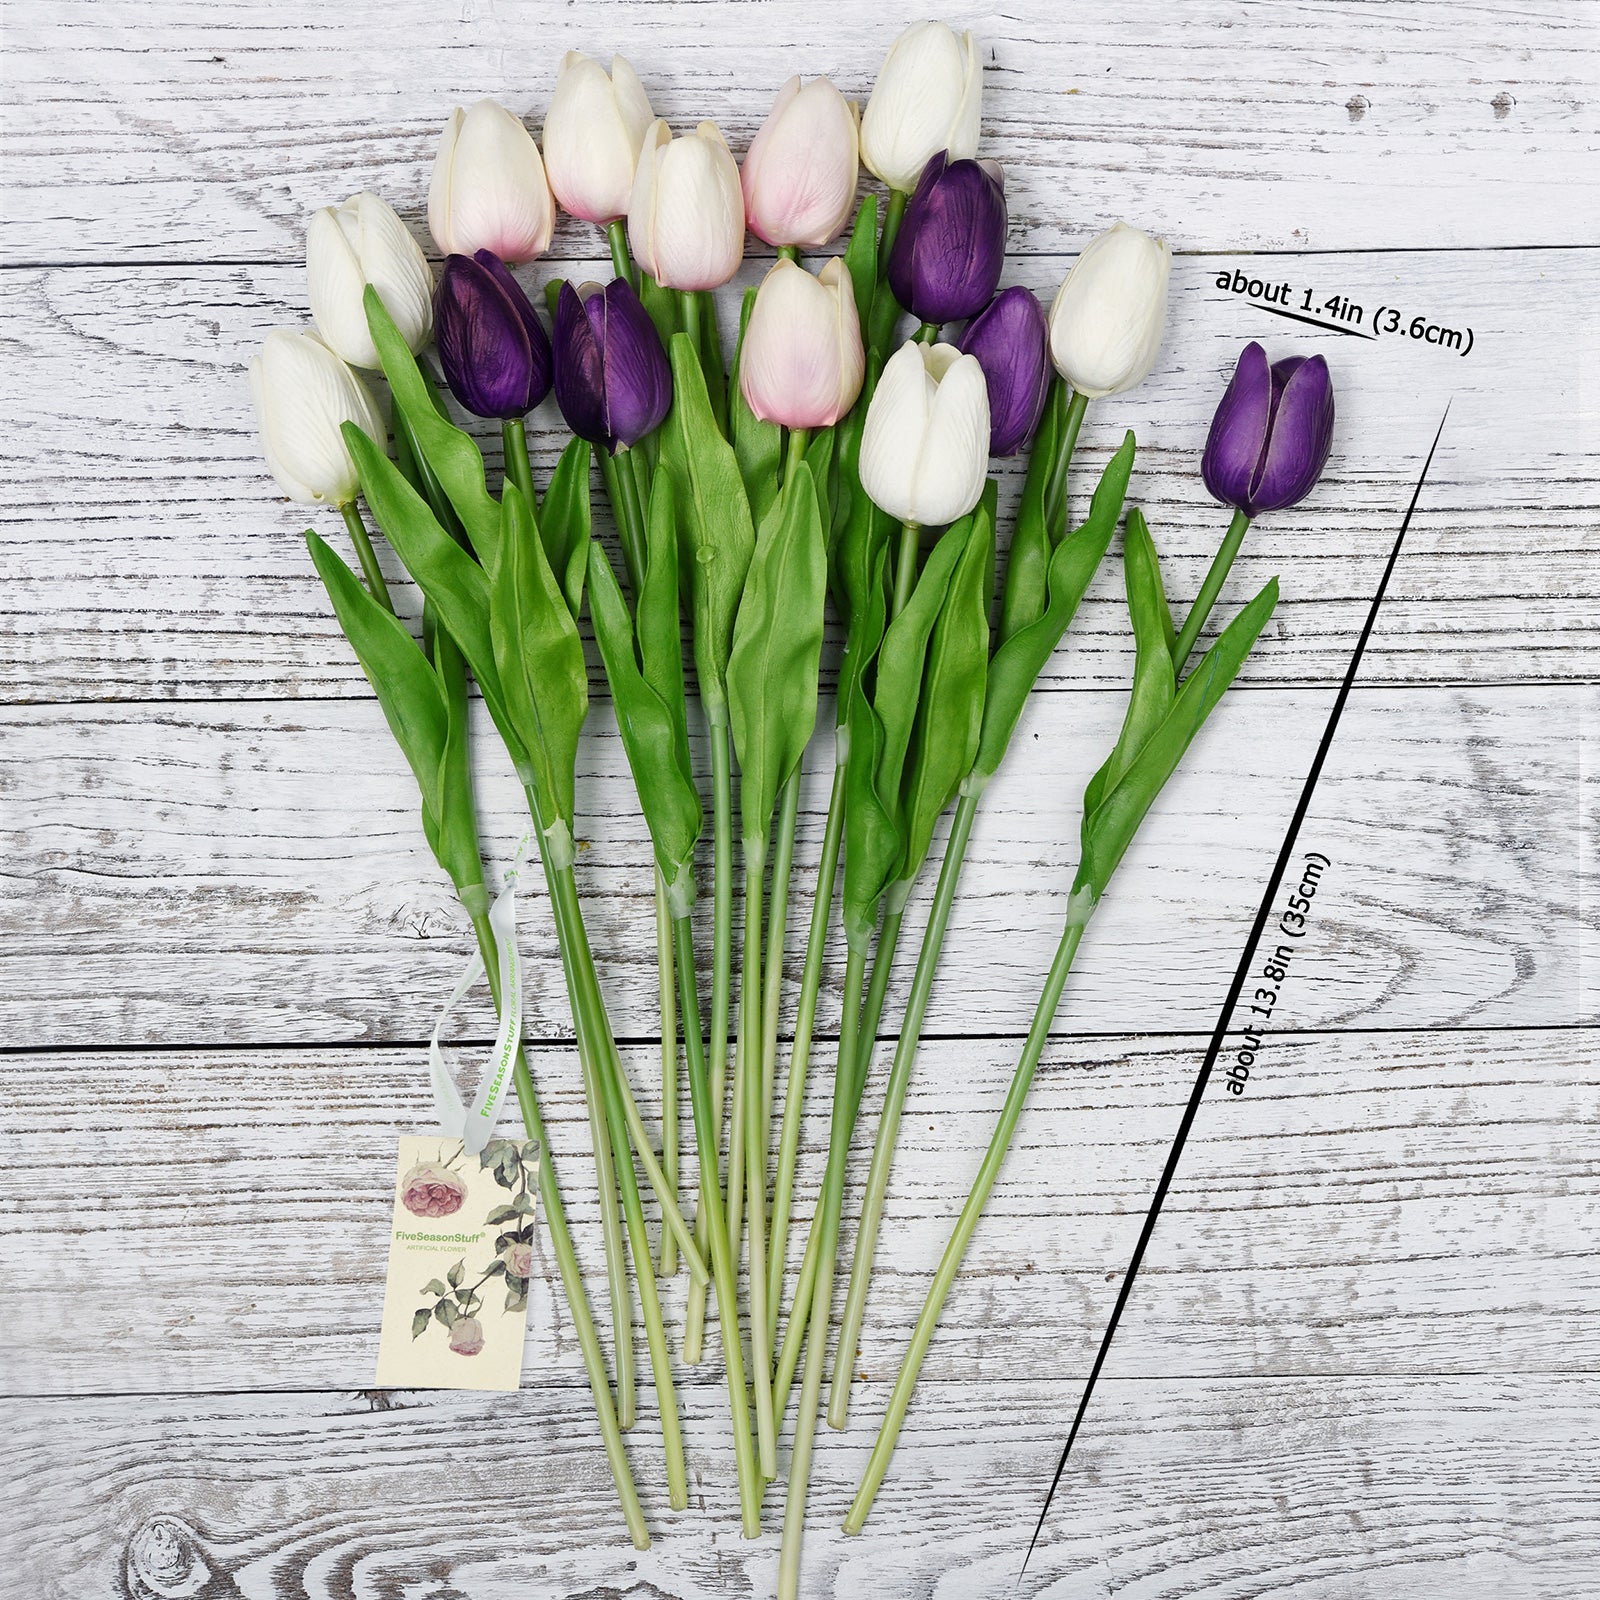 Mix White and Purple Real Touch Tulips Artificial Flowers Bouquet 15 Stems